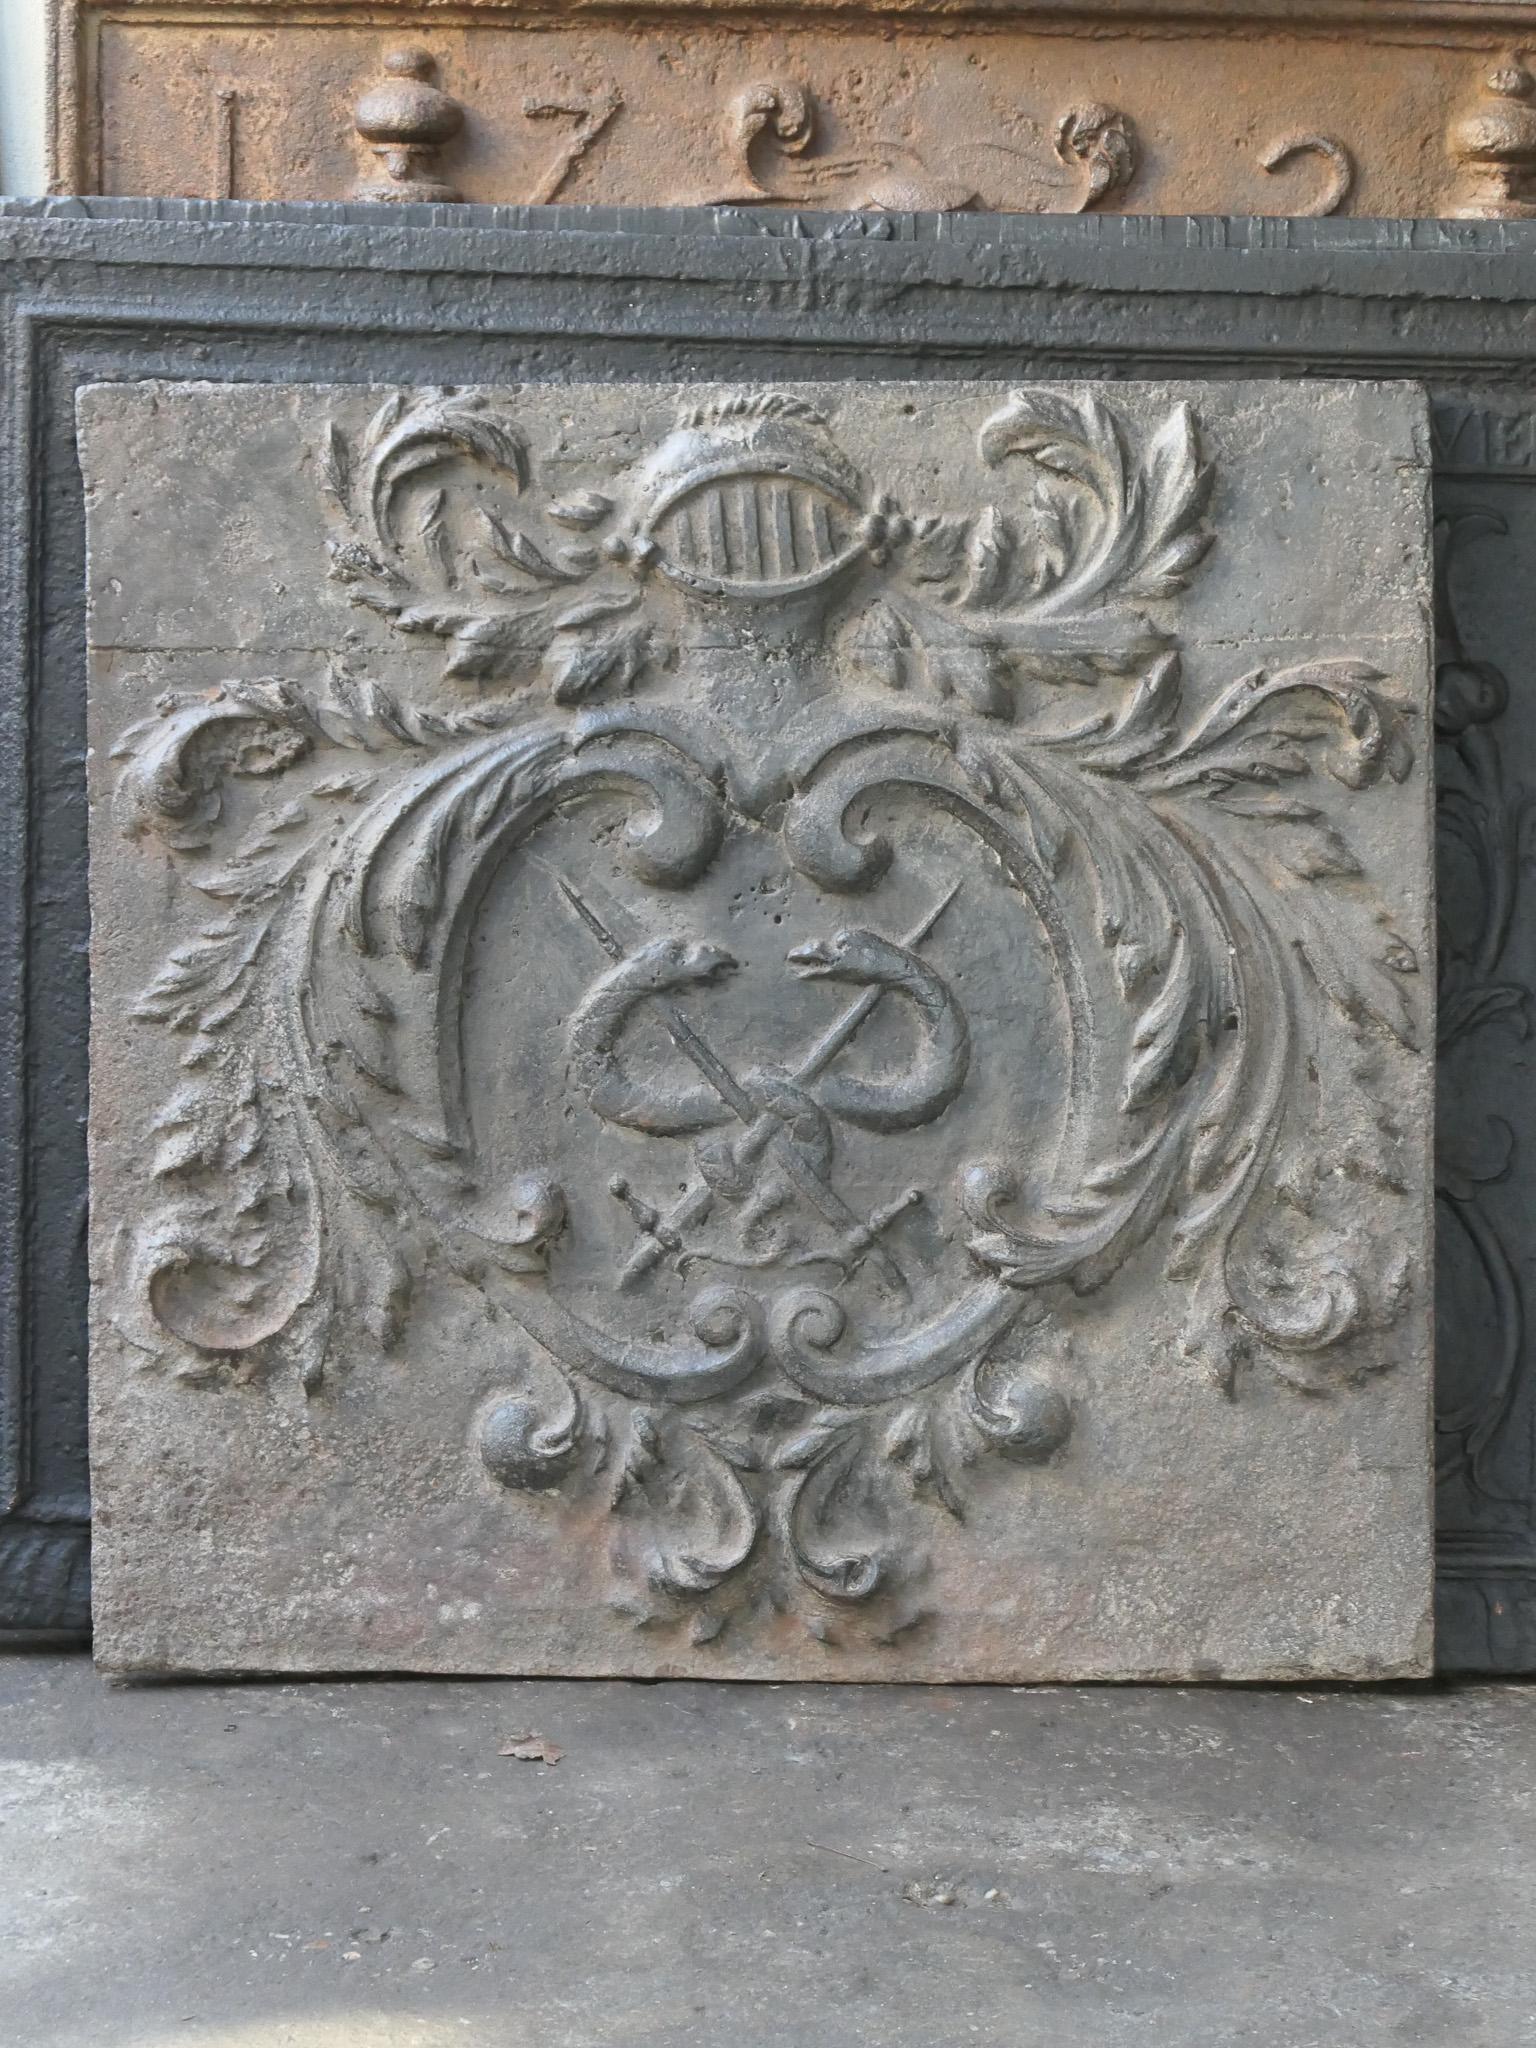 Beautiful 17th century French Louis XIV period fireback with an unknown coat of arms.

The fireback is made of cast iron and has a brown patina. It can be made black / pewter upon request. It is in a good condition, no cracks.

This product weighs